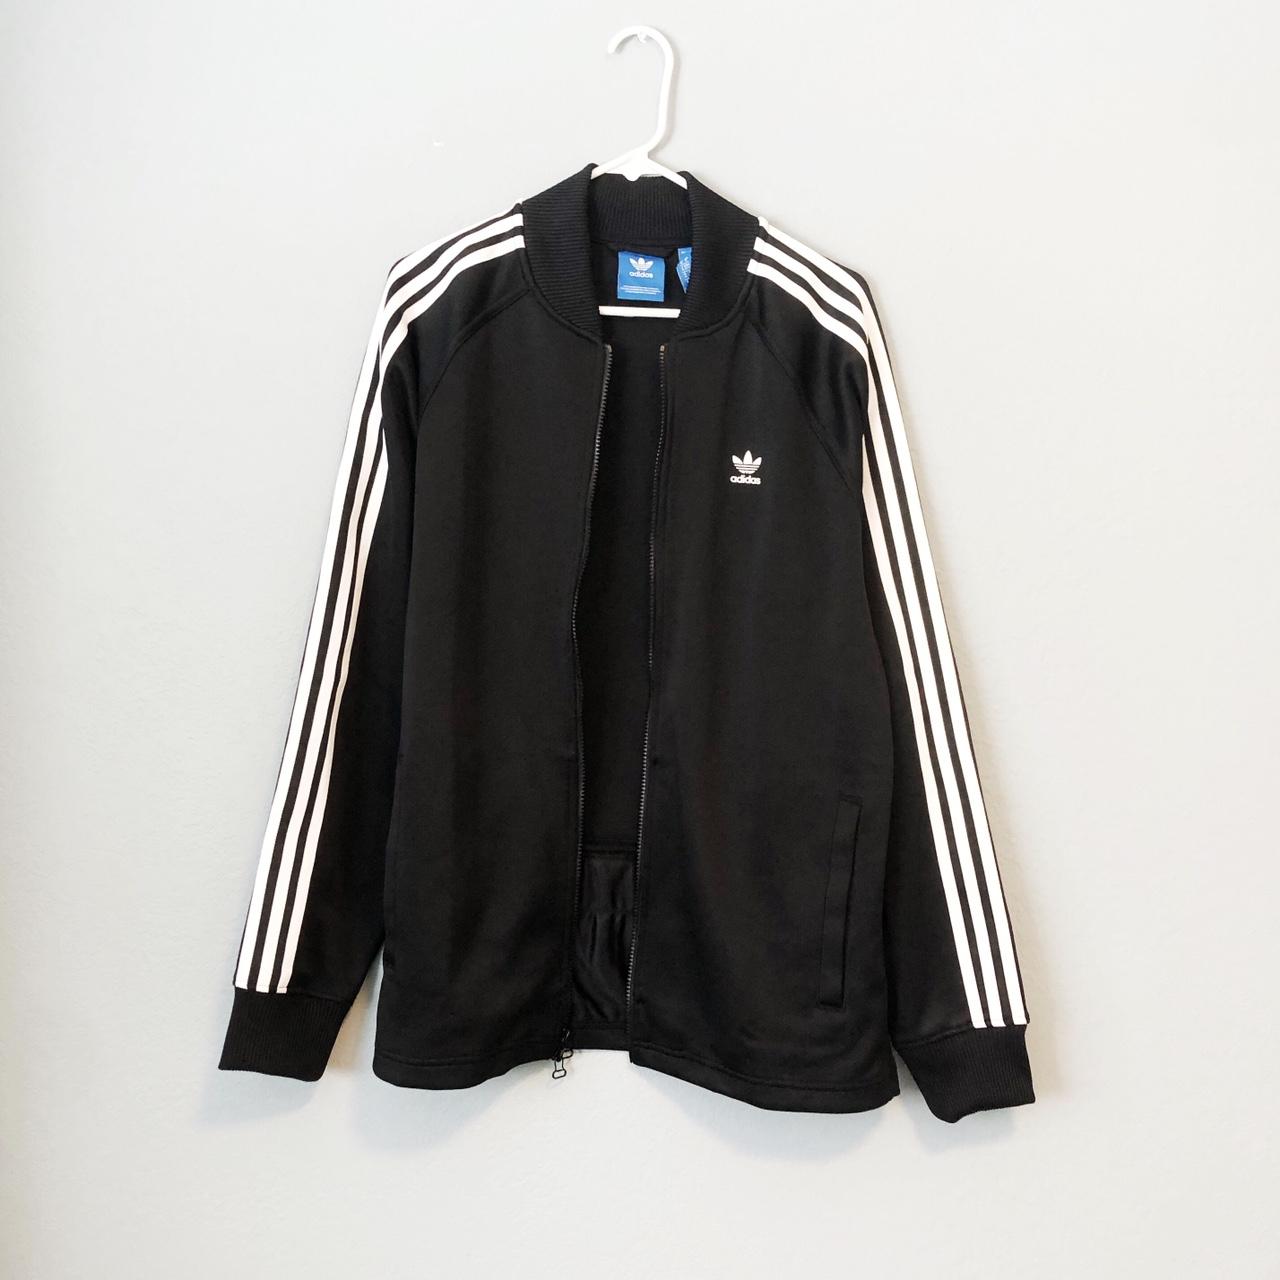 adidas soccer jacket great condition barely worn - Depop